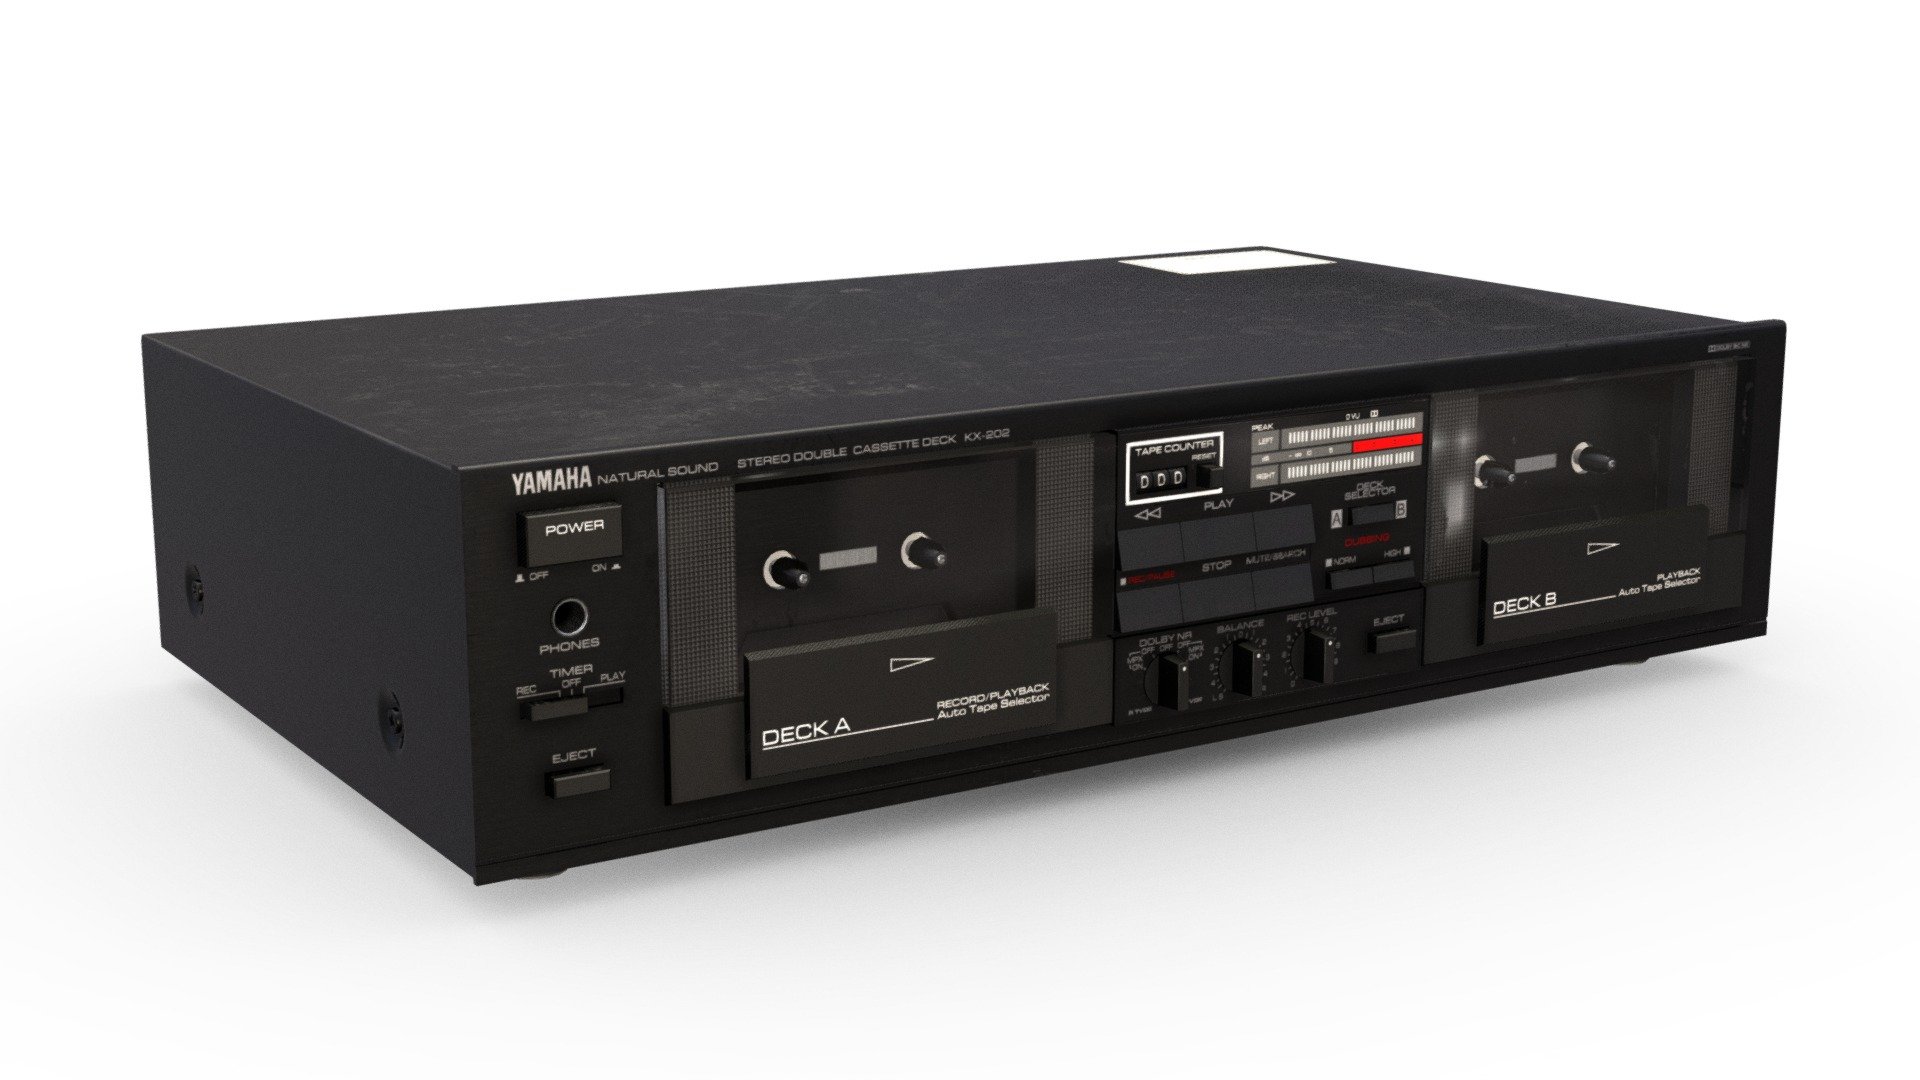 The Yamaha KX-202 Cassette Deck features two separate decks for playback and recording, and solely playback. This stylish, black, metal music player sits snuggly between it's respective record player, CD player and amplifier.
Technically it's KX-W202 and not KX-202, but hey &ndash; who's got time to fix a decal? 


This 3D model has been crafted with great attention to detail; the model is entirely to scale, and features 4k PBR textures created in Substance Painter.

 - Cassette Deck (Yamaha KX-202) - Download Free 3D model by AleixoAlonso 3d model